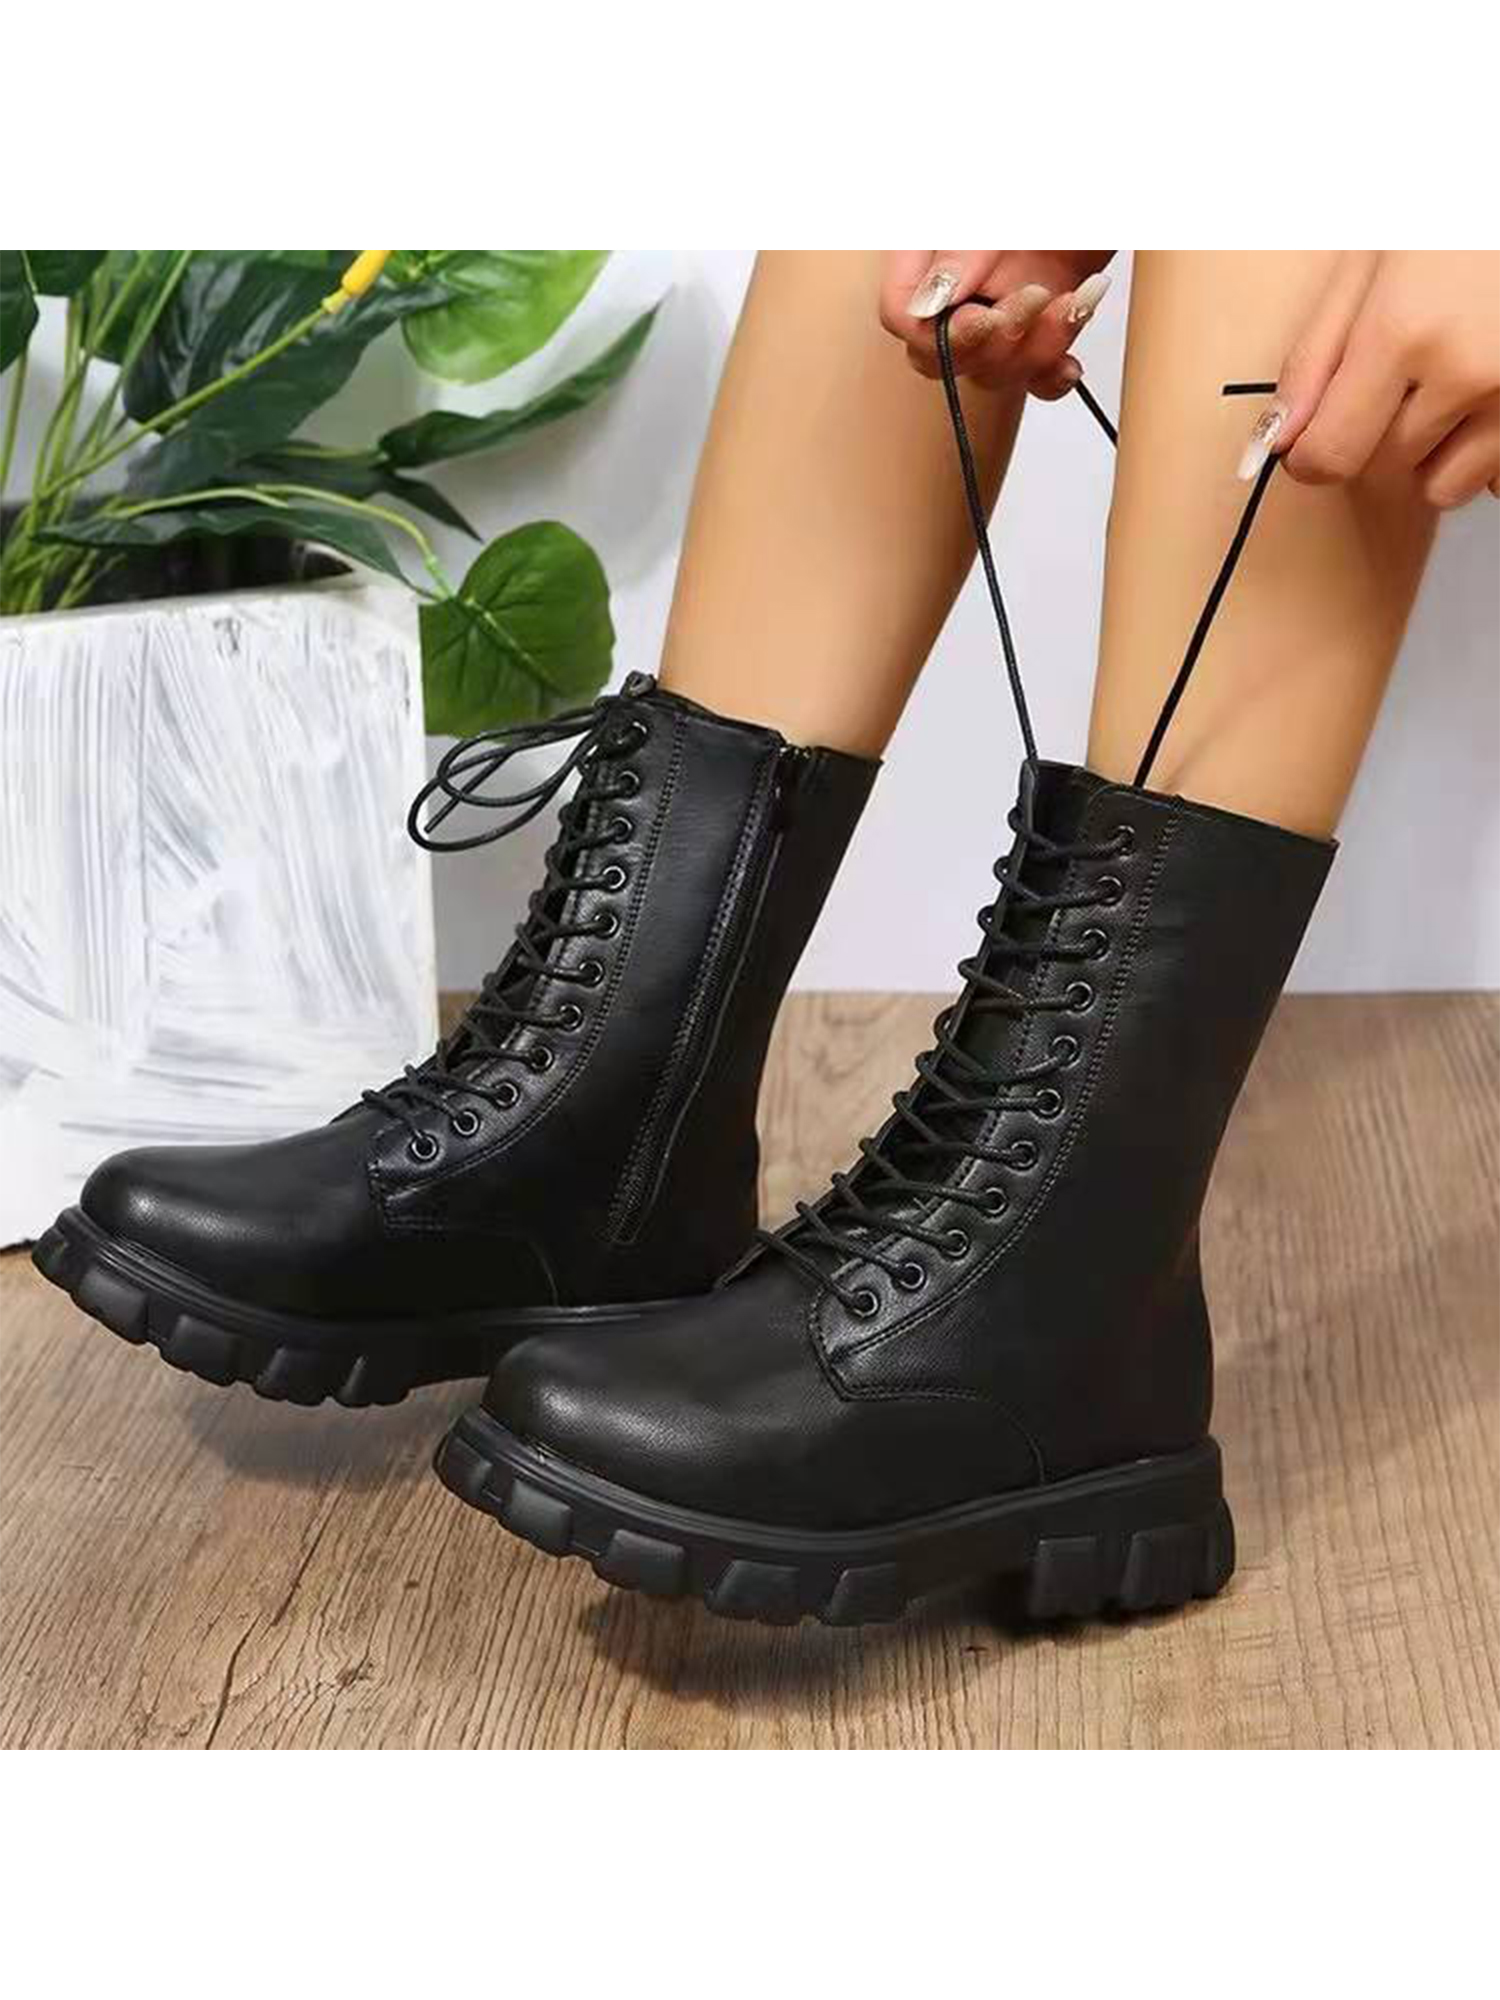 Gomelly Women Comfort Combat Boot Non-Slip Chunky Heel High Top Shoes Military Walking Fashion Lace Up Work Boots Black 8 - image 5 of 6